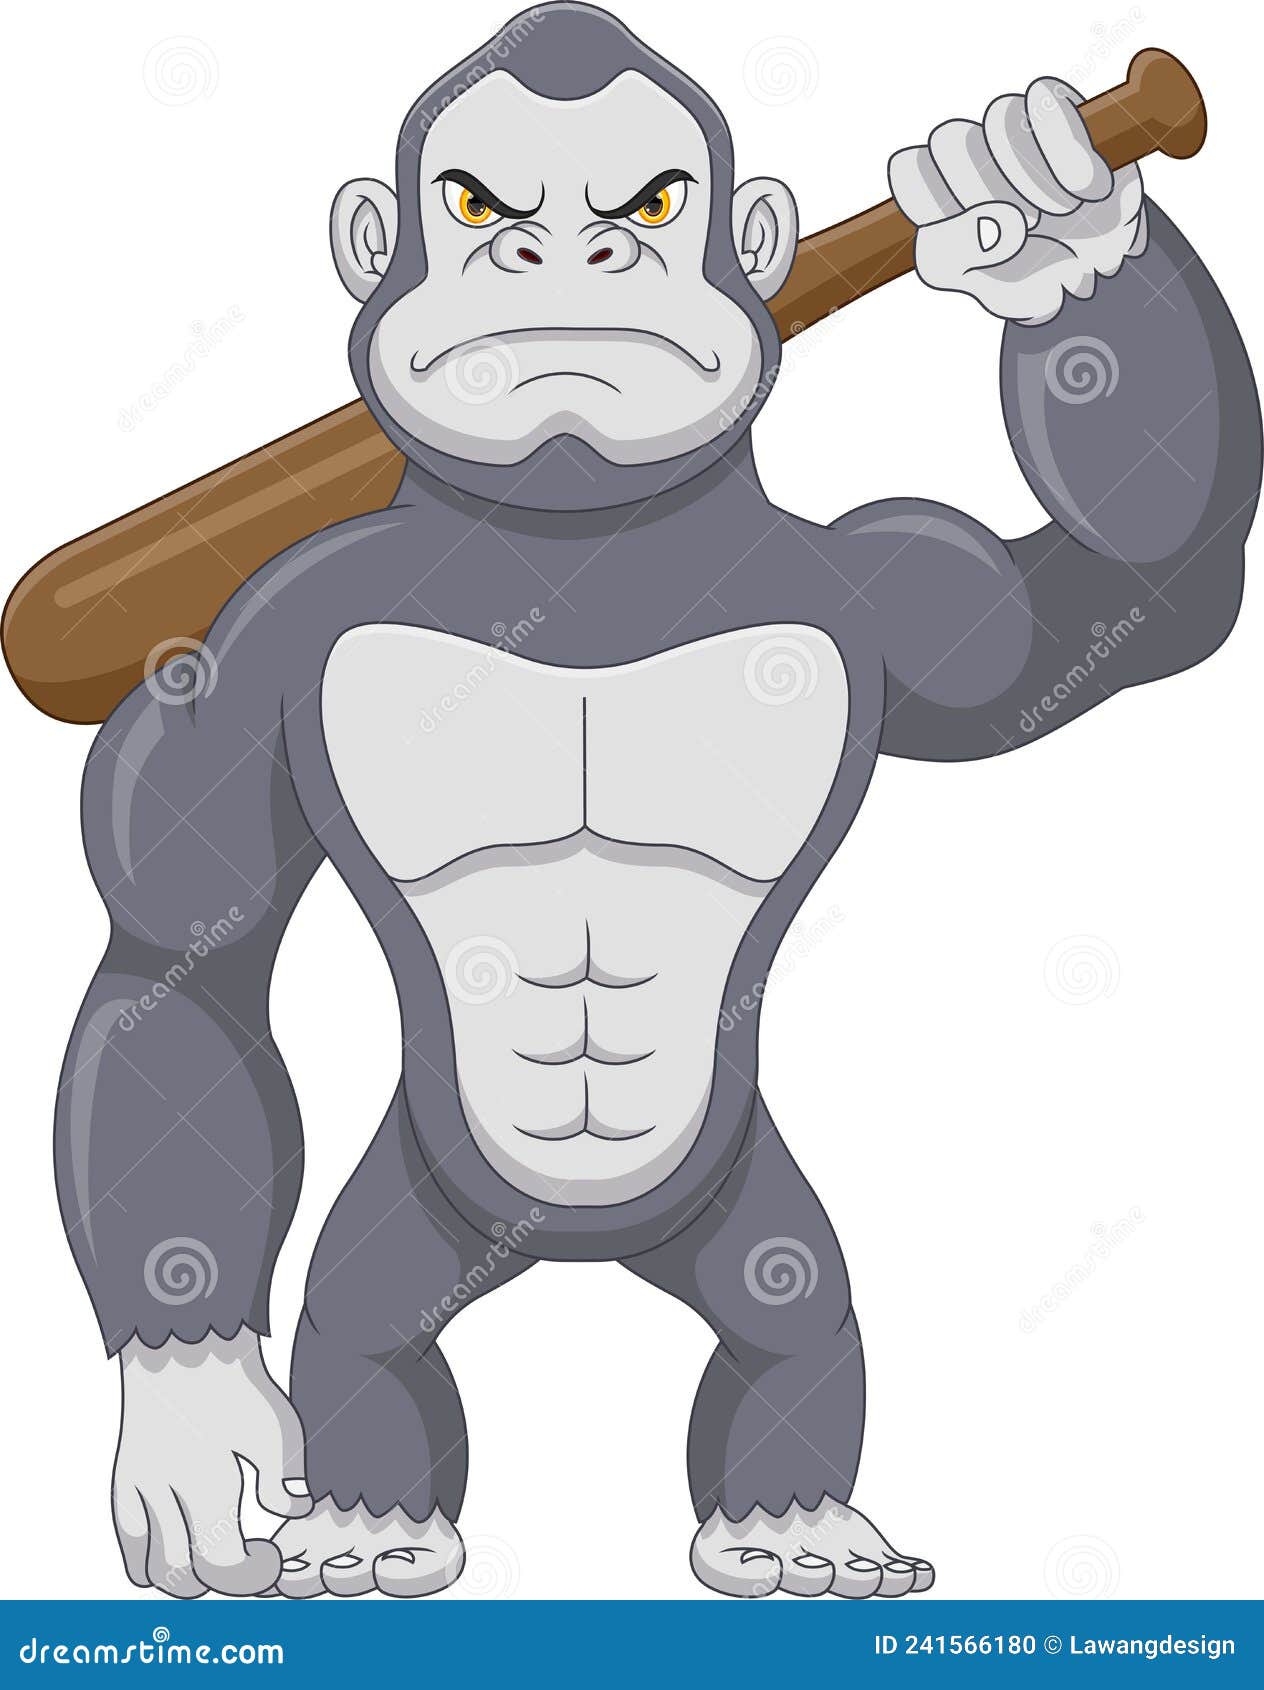 Gorilla Tag Vector, Sticker Clipart The Big Bad Gorilla Logo Illustration  Cartoon, Sticker, Clipart PNG and Vector with Transparent Background for  Free Download